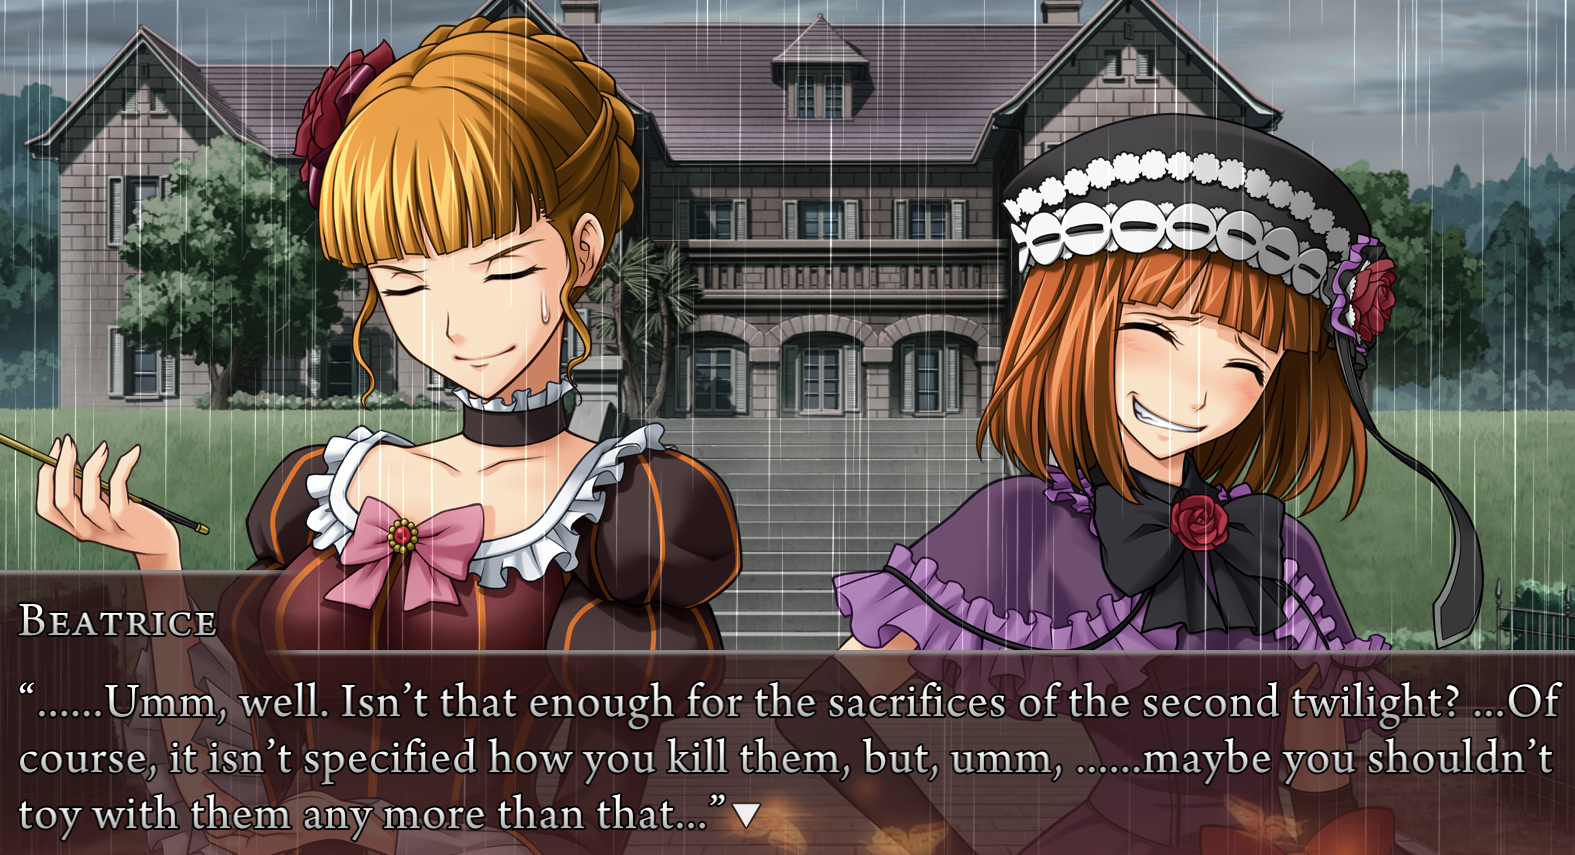 Beato, to Eva Beatrice: ......Umm, well. Isn't that enough for the sacrifices of the second twilight? ...Of course, it isn't specified how you kill them, but, umm, ......maybe you shouldn't toy with them any more than that...